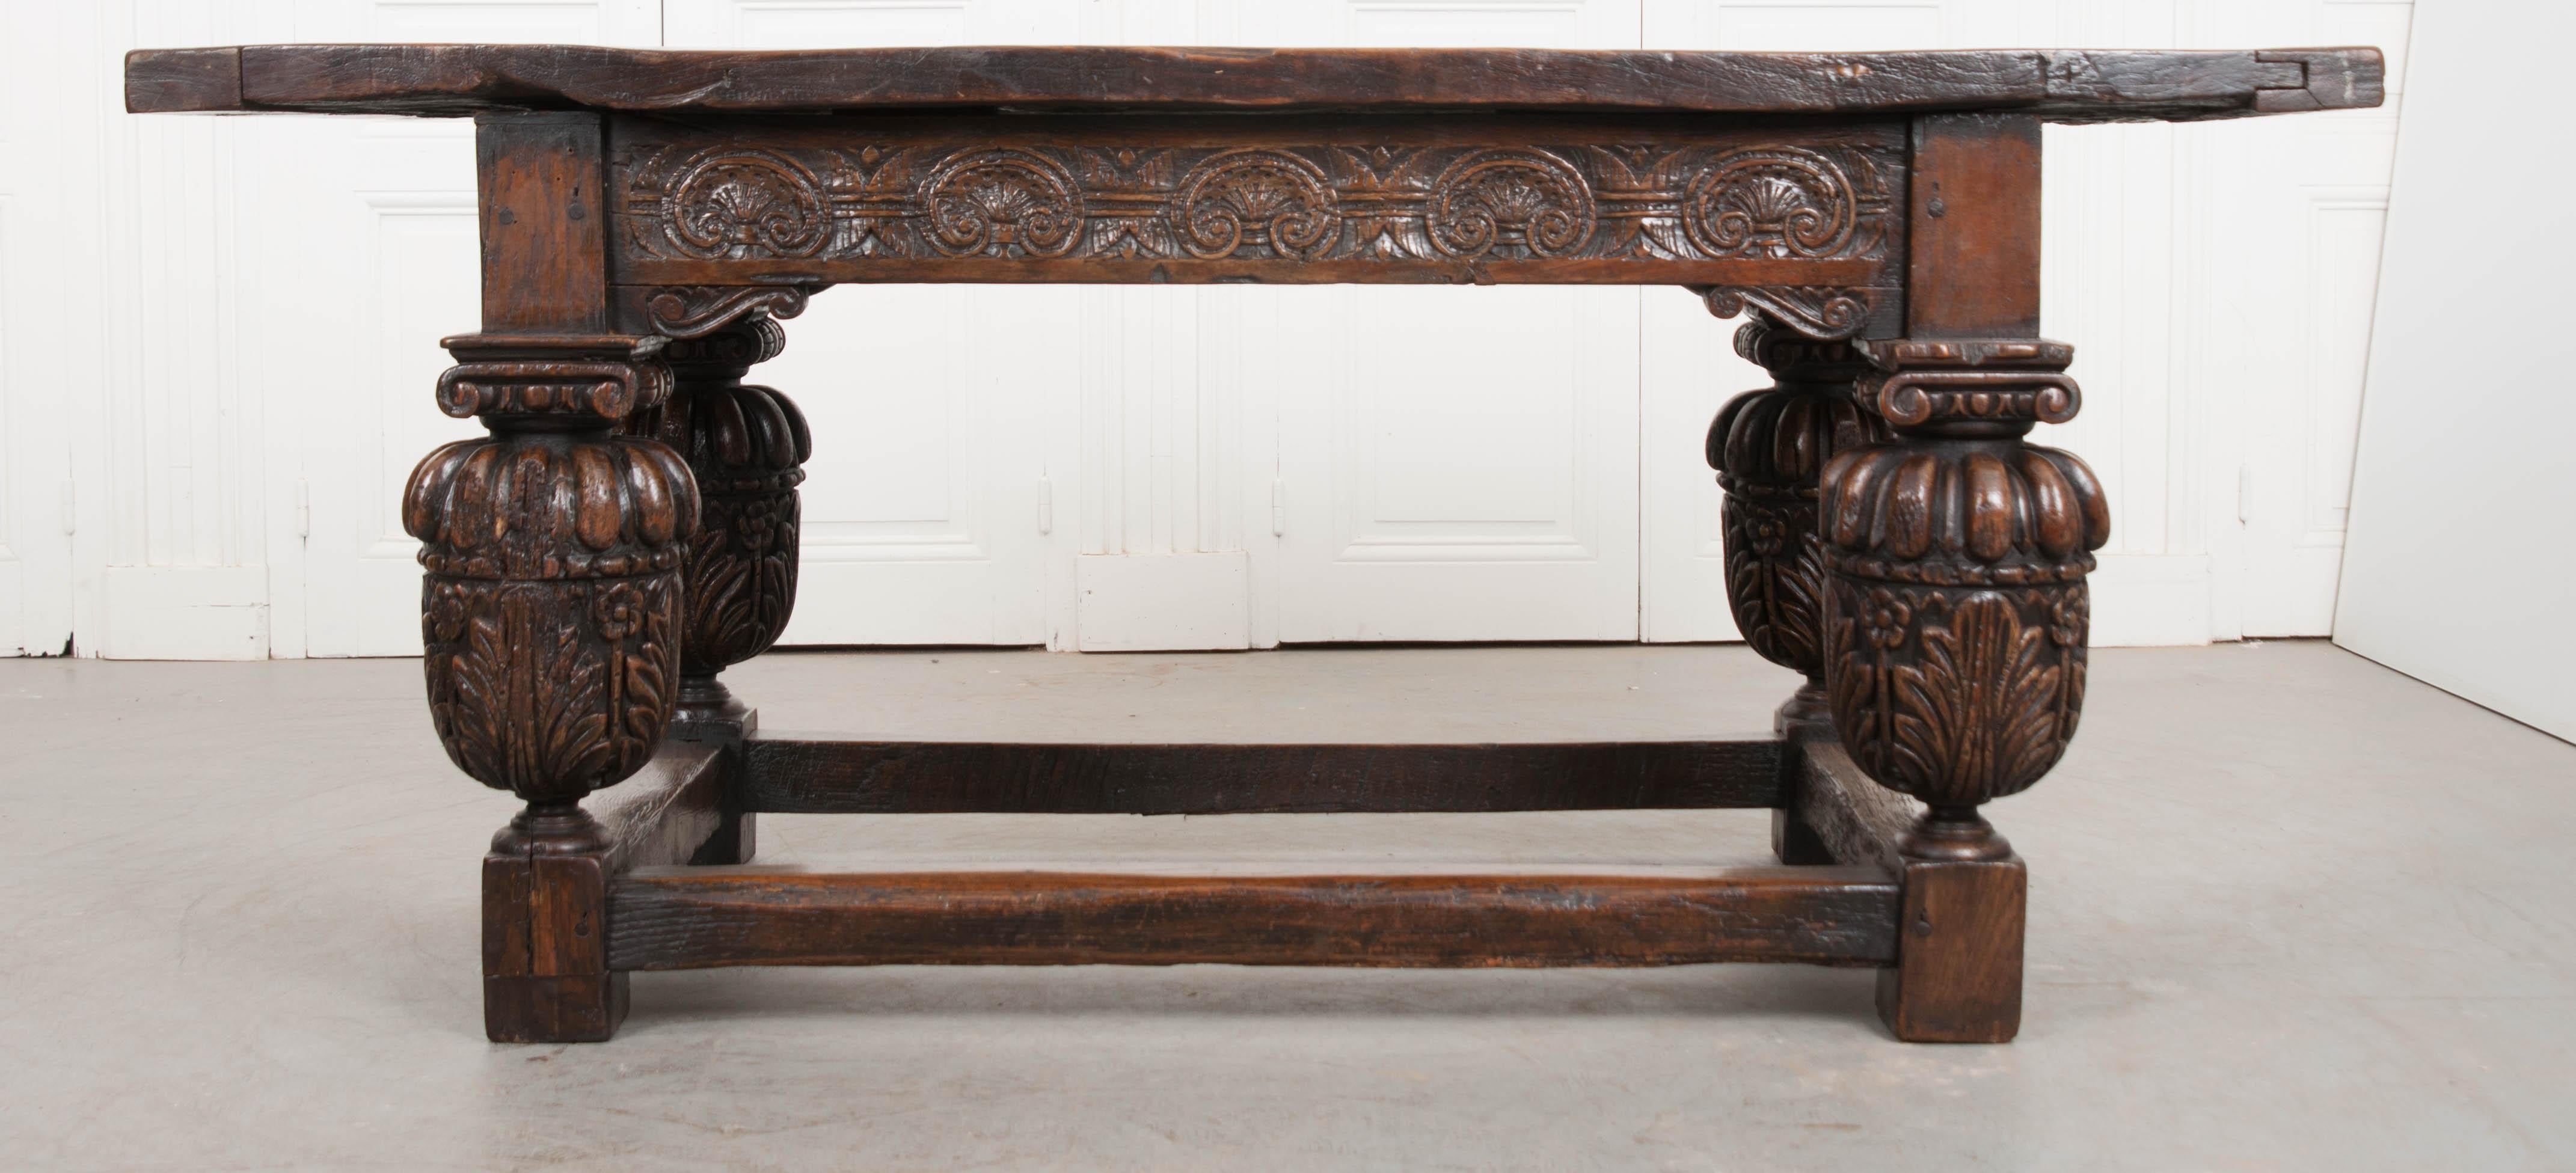 This exuberantly-carved Spanish oak refectory table, circa 1800, will add a rich and bold statement to any room it’s placed. The cleated plank top, above a scroll-carved frieze, is raised on bulbous gadroon-and-foliage carved cup and supports.